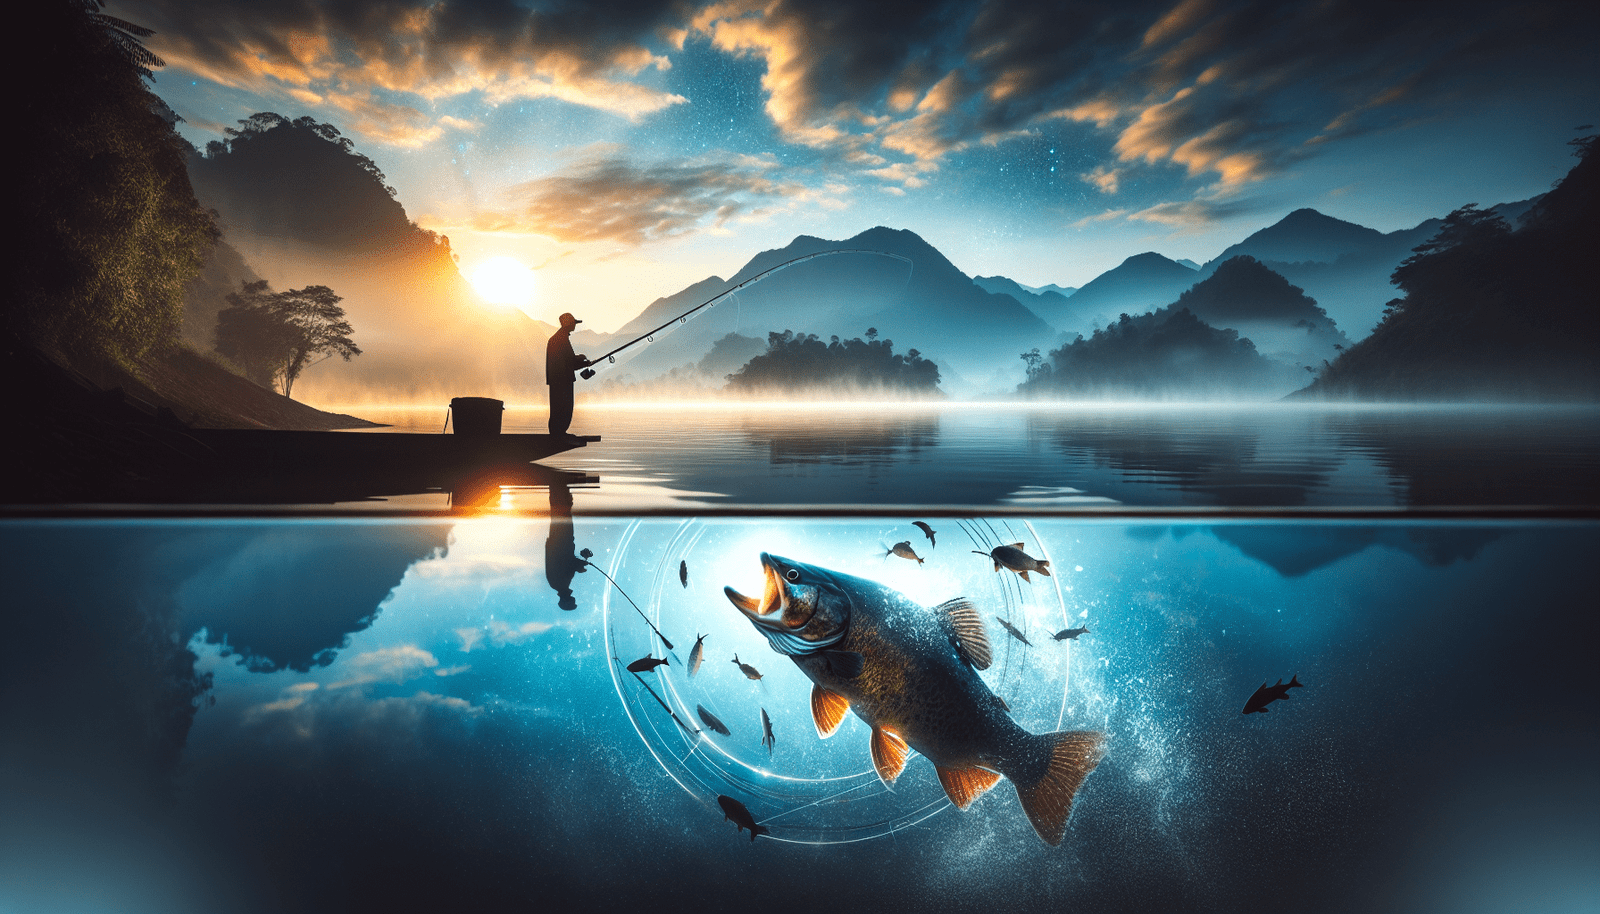 Fishing Photography: Capturing Your Catch And Scenery